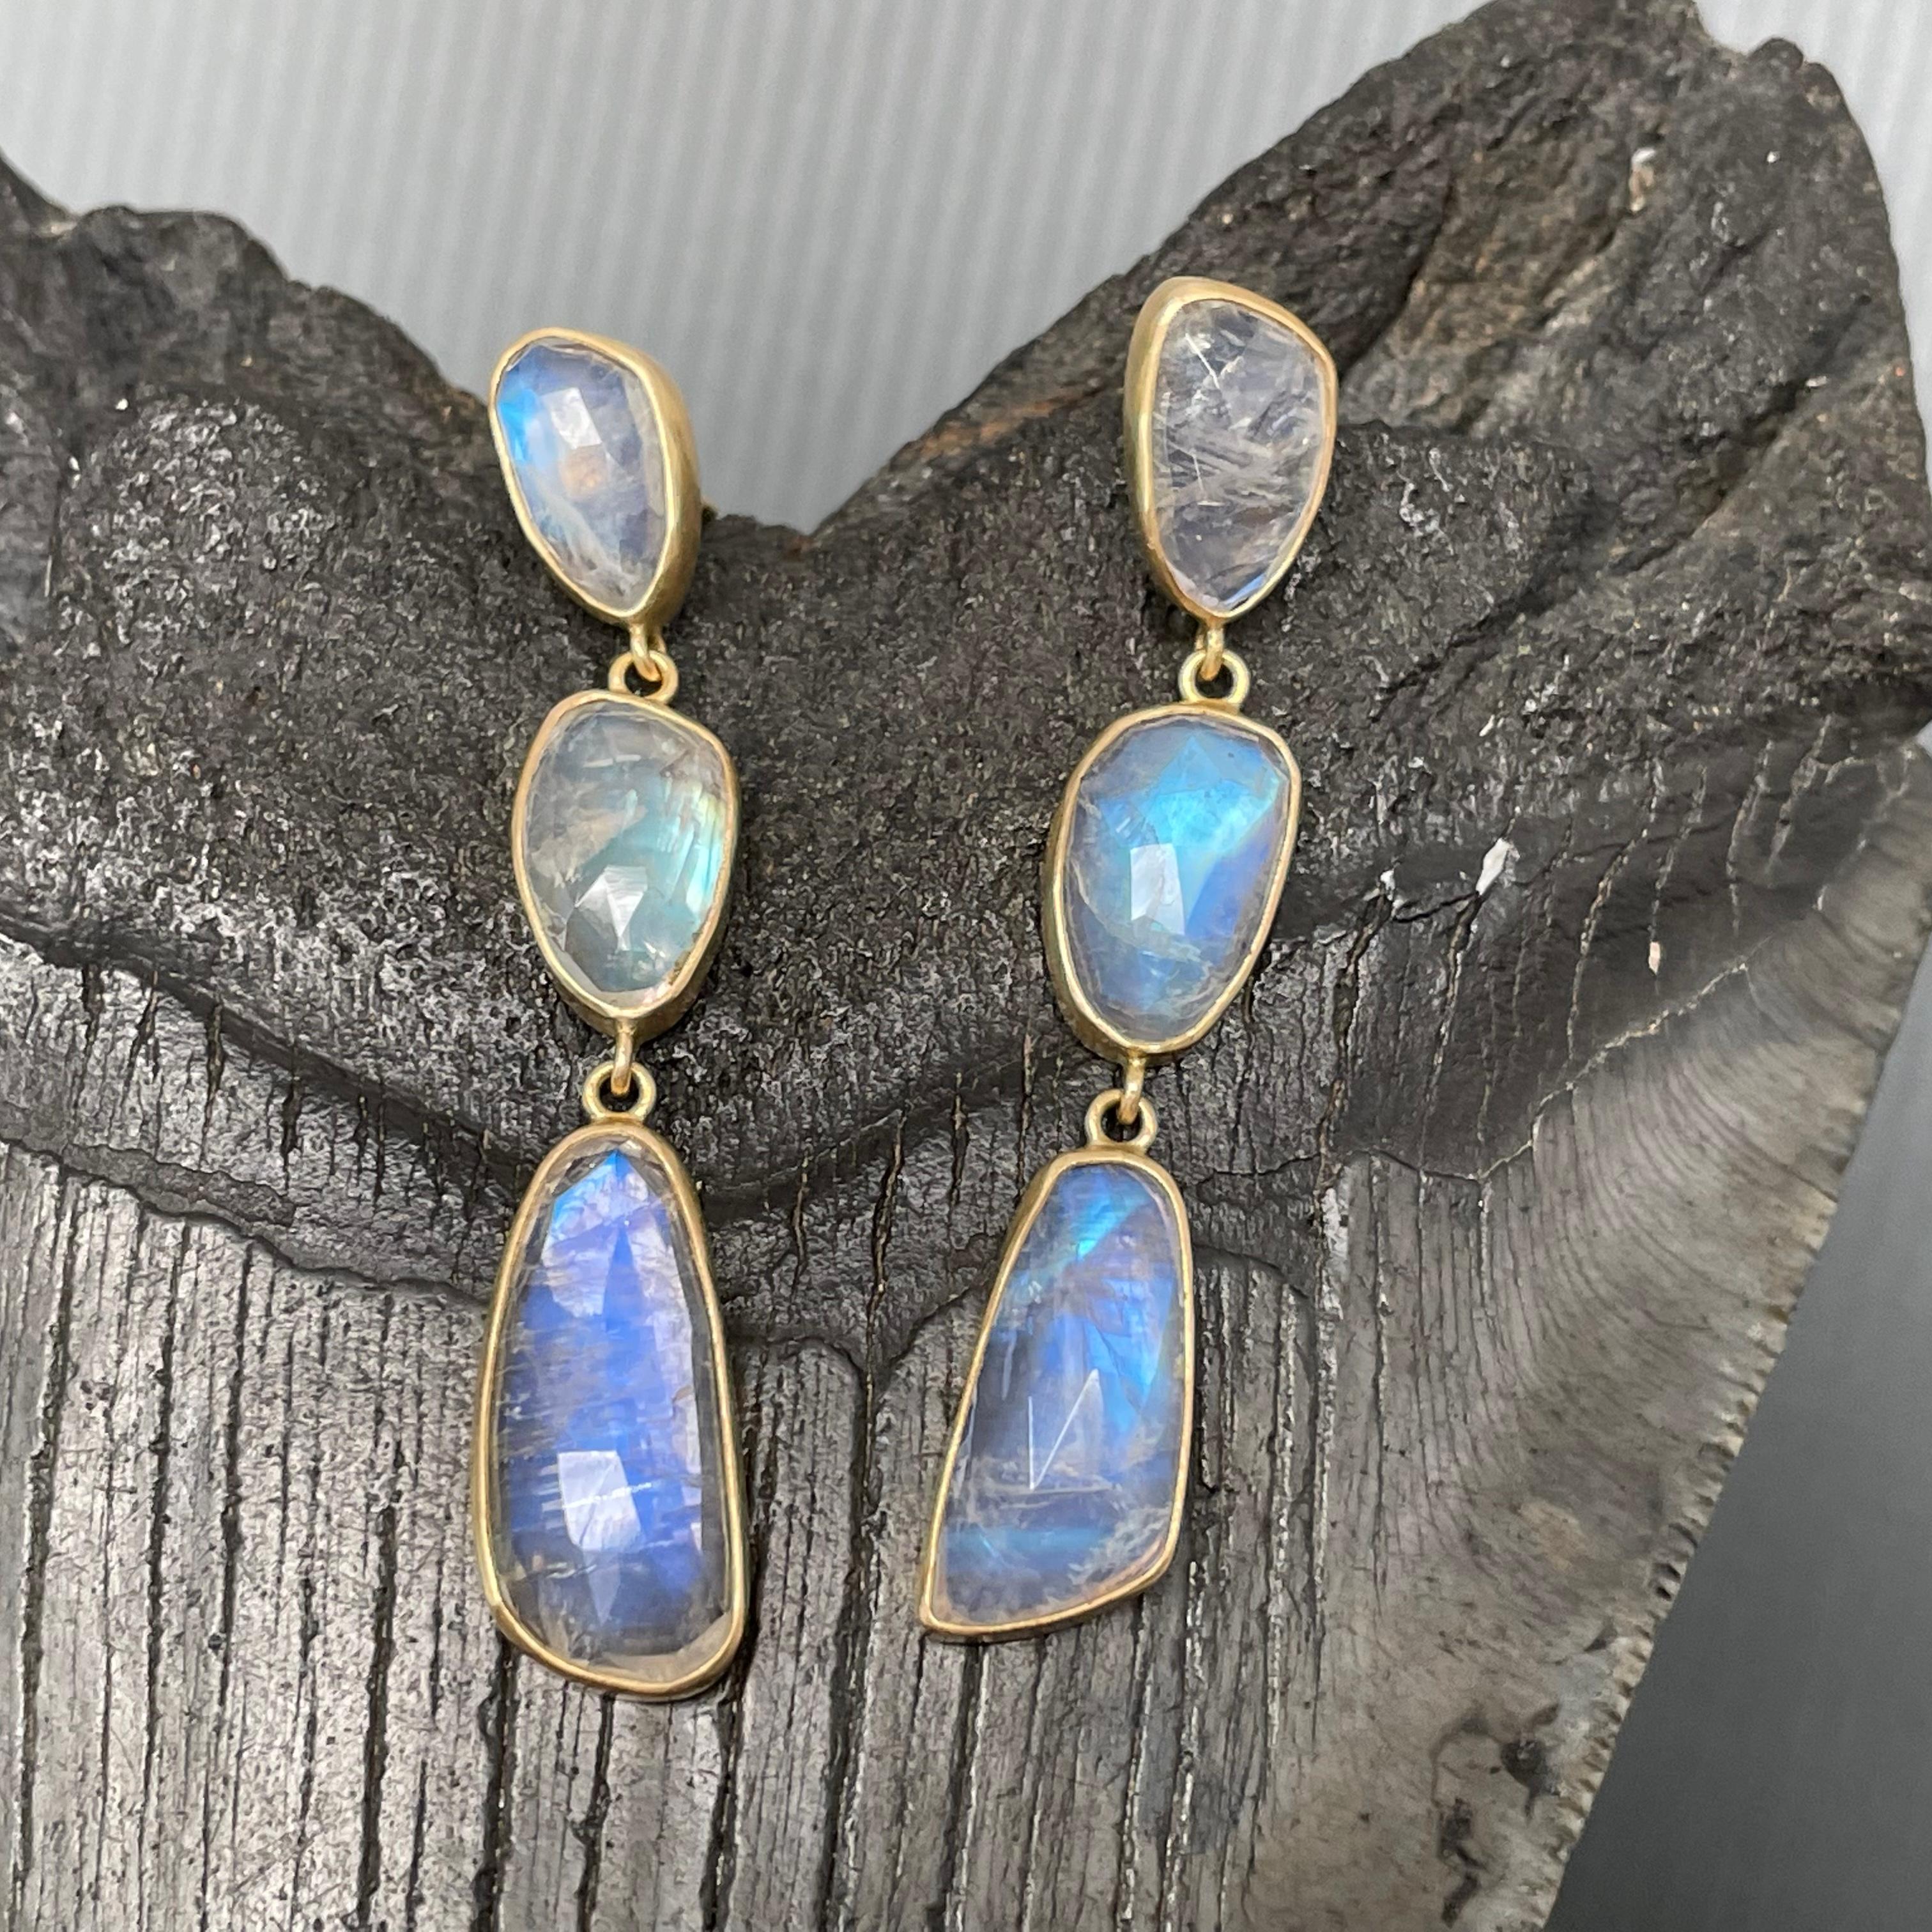 Three irregular rose-cut approximately 7 x 11 mm to 8 x 16 mm shimmering  rainbow moonstones are set in simple matte-finish 18K bezels and dangle below posts on comfortable silicone ear nuts in this design. The organic shapes draw the eye. Wow!